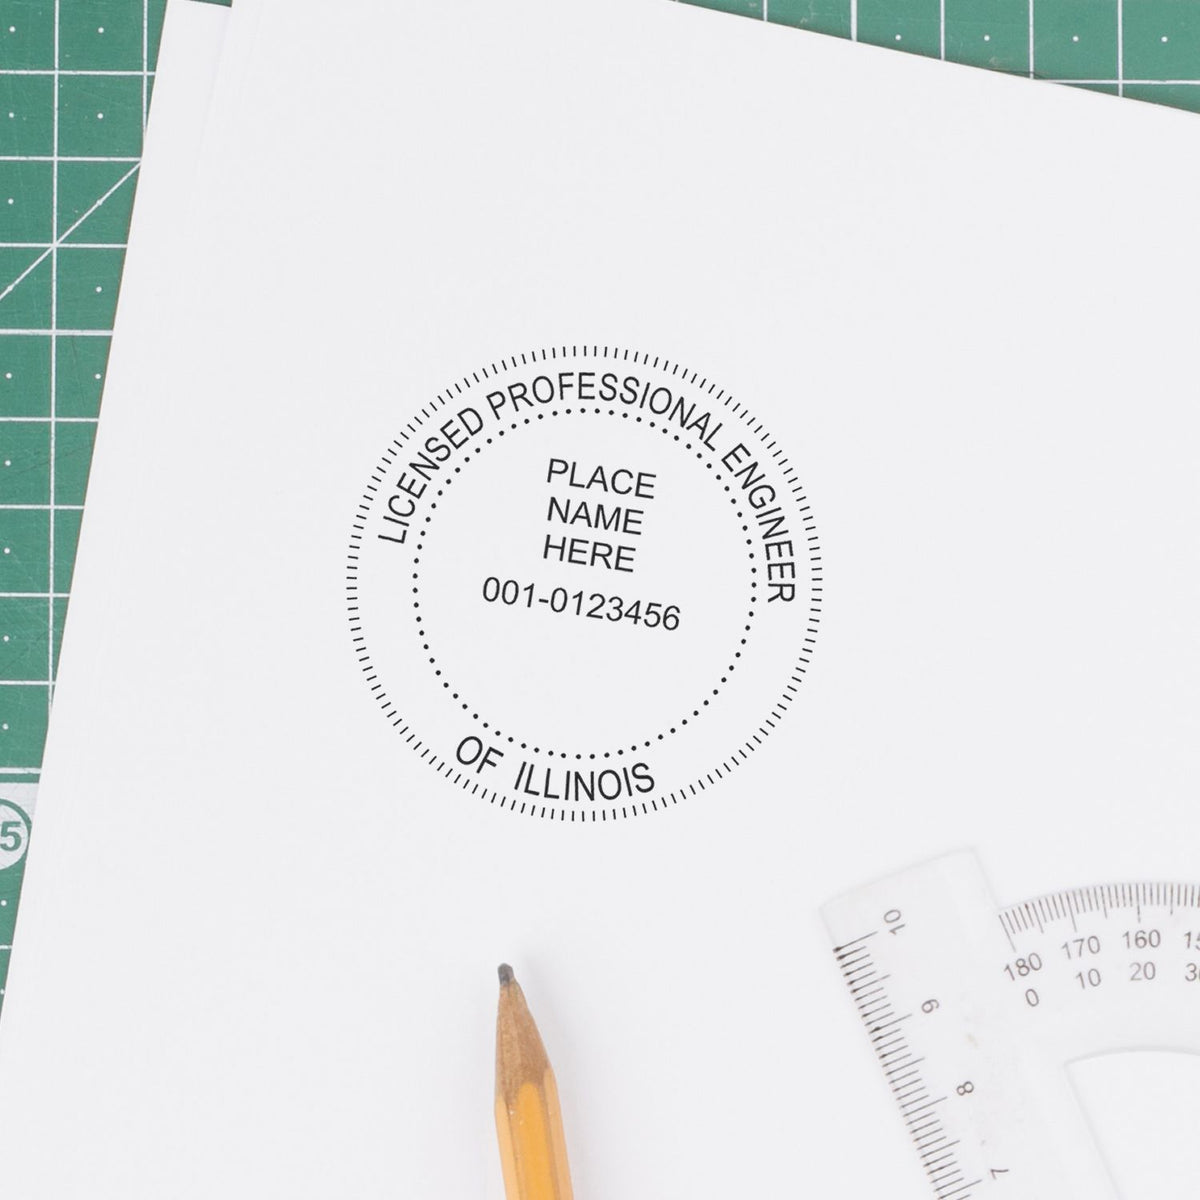 A photograph of the Illinois Professional Engineer Seal Stamp stamp impression reveals a vivid, professional image of the on paper.